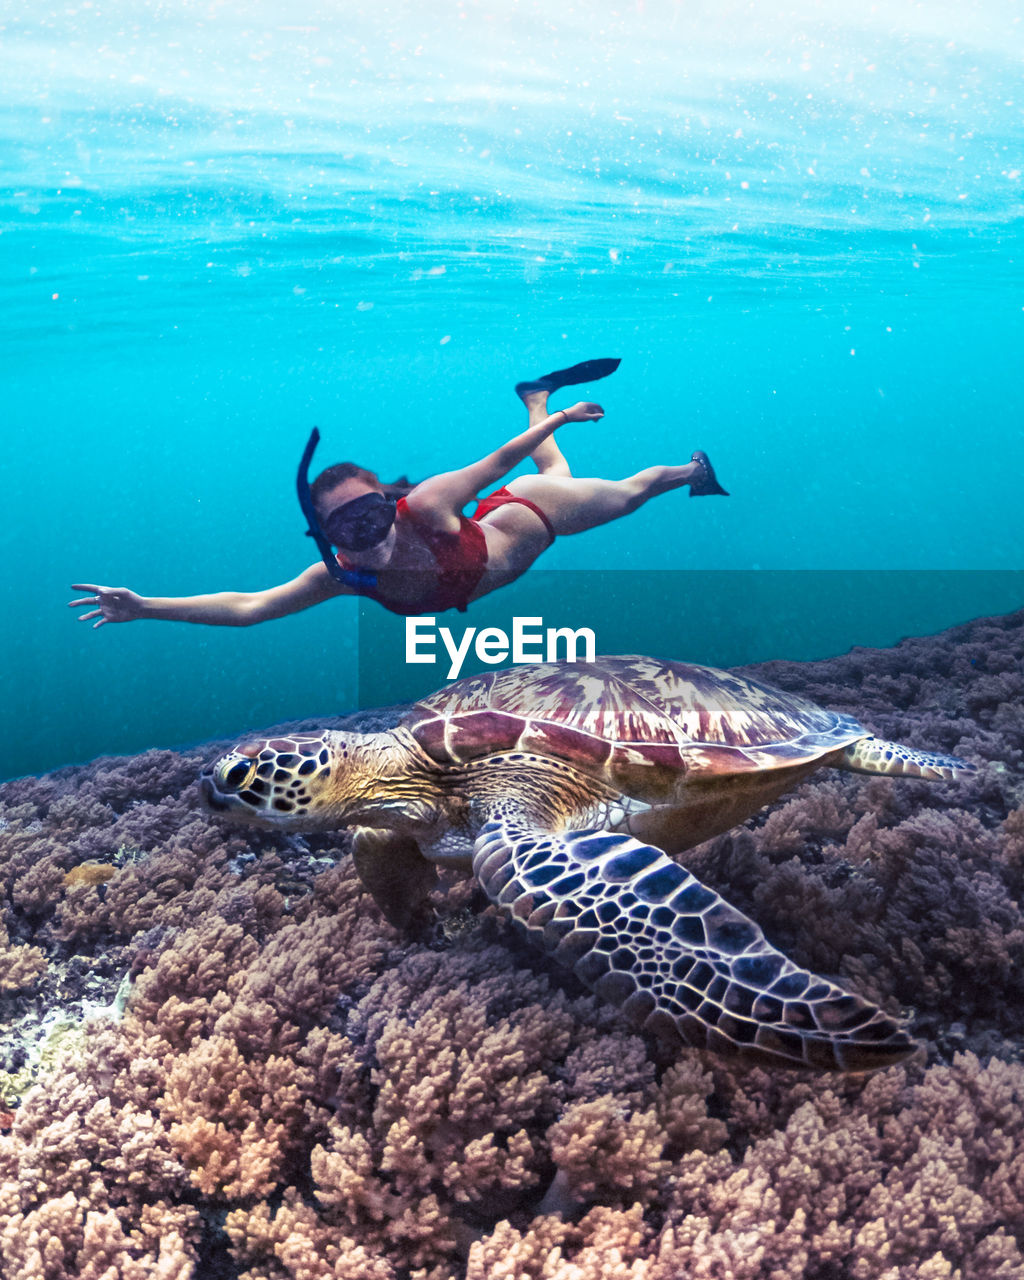 Girl freediving in the ocean with a wild sea turtle and coral reef